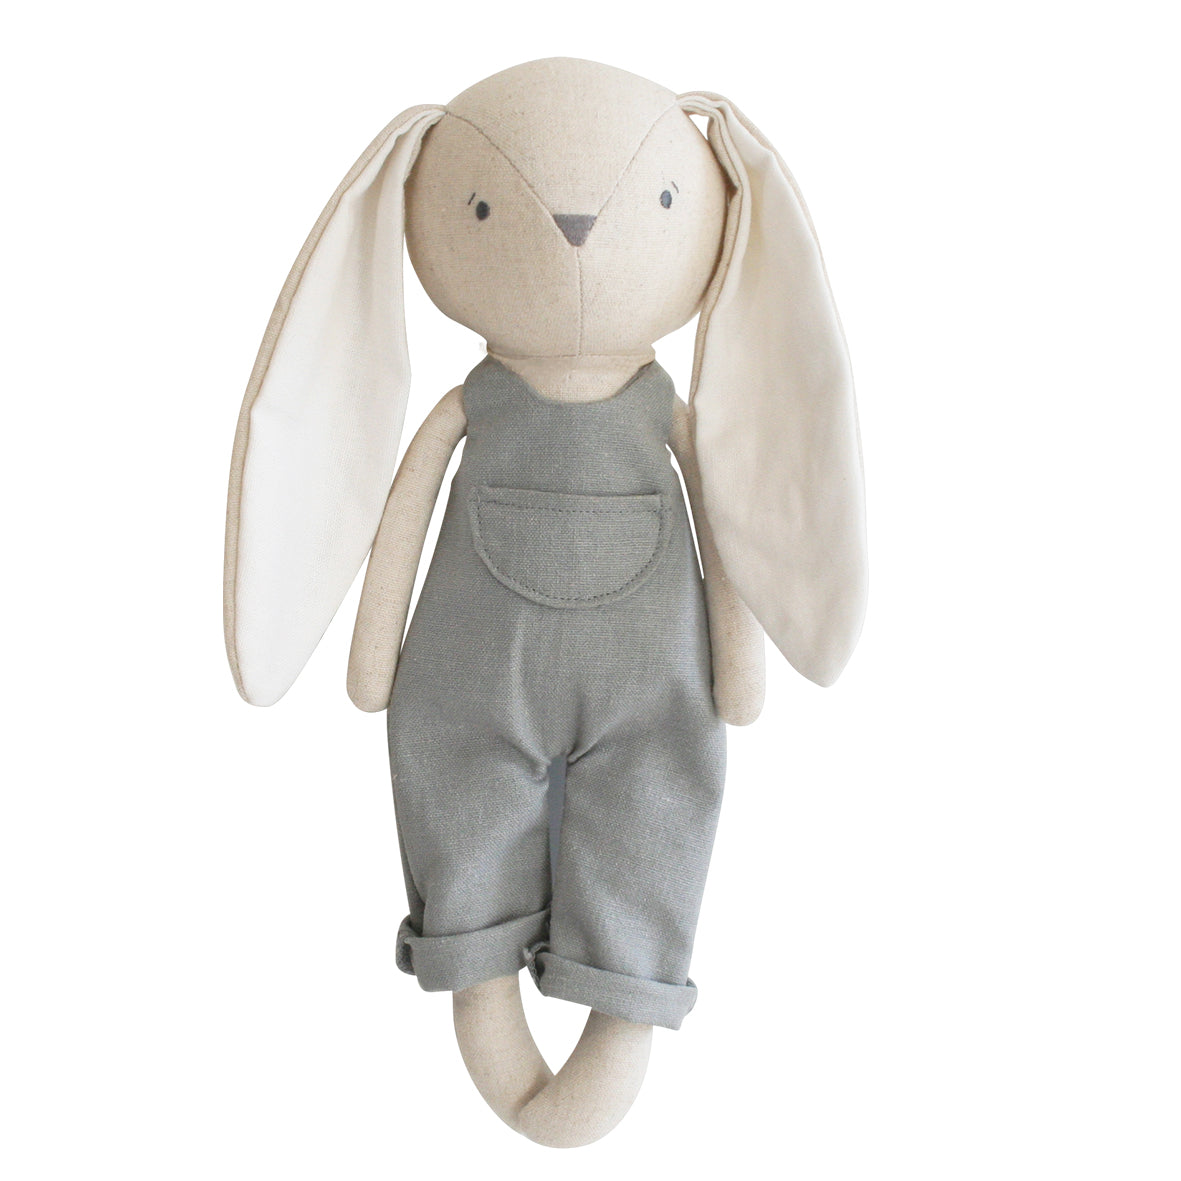 Oliver Bunny is an adorable friend that comes dressed in cute linen overalls. He is made from a beautiful cotton/linen fabric and features a sweet embroidered face.  28cm tall